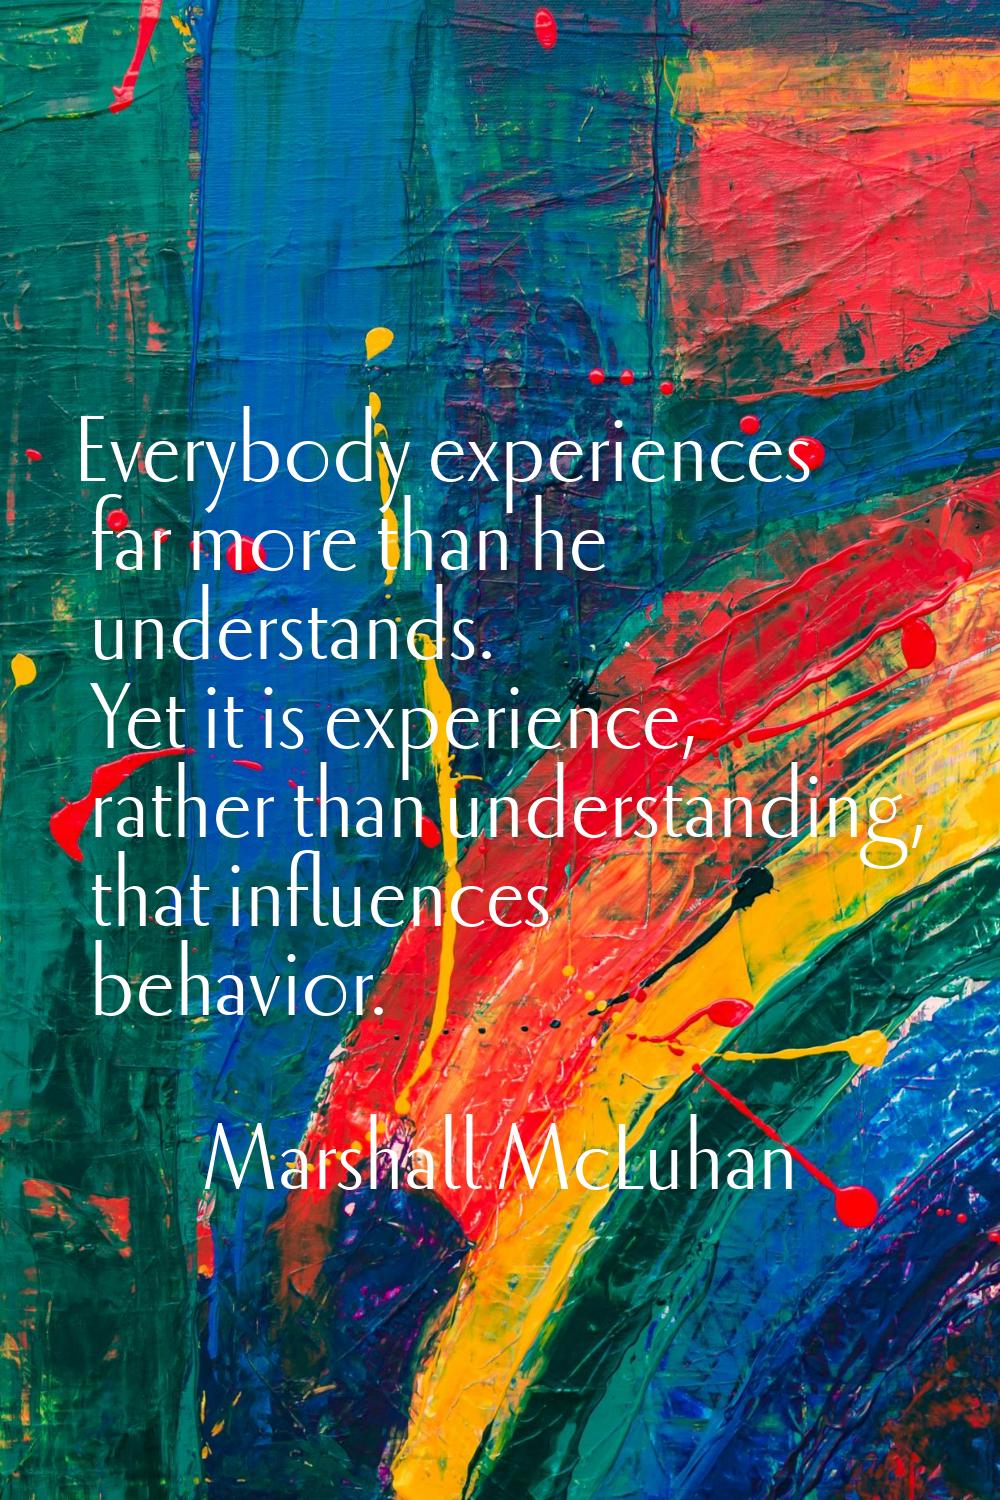 Everybody experiences far more than he understands. Yet it is experience, rather than understanding